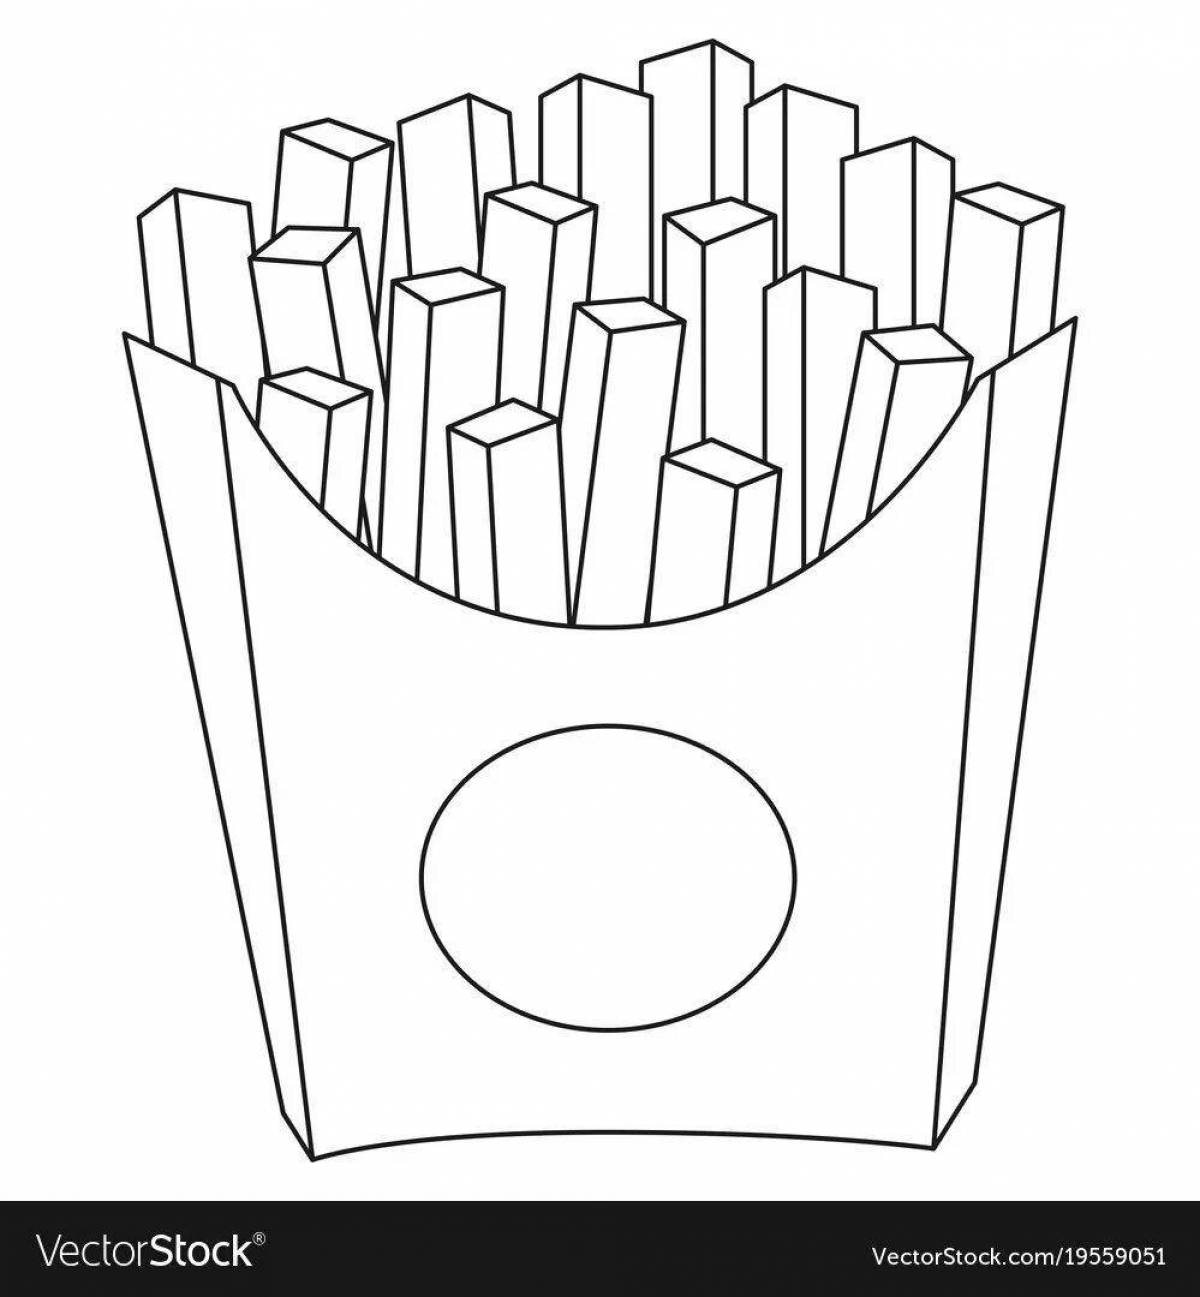 French fries coloring pages for kids